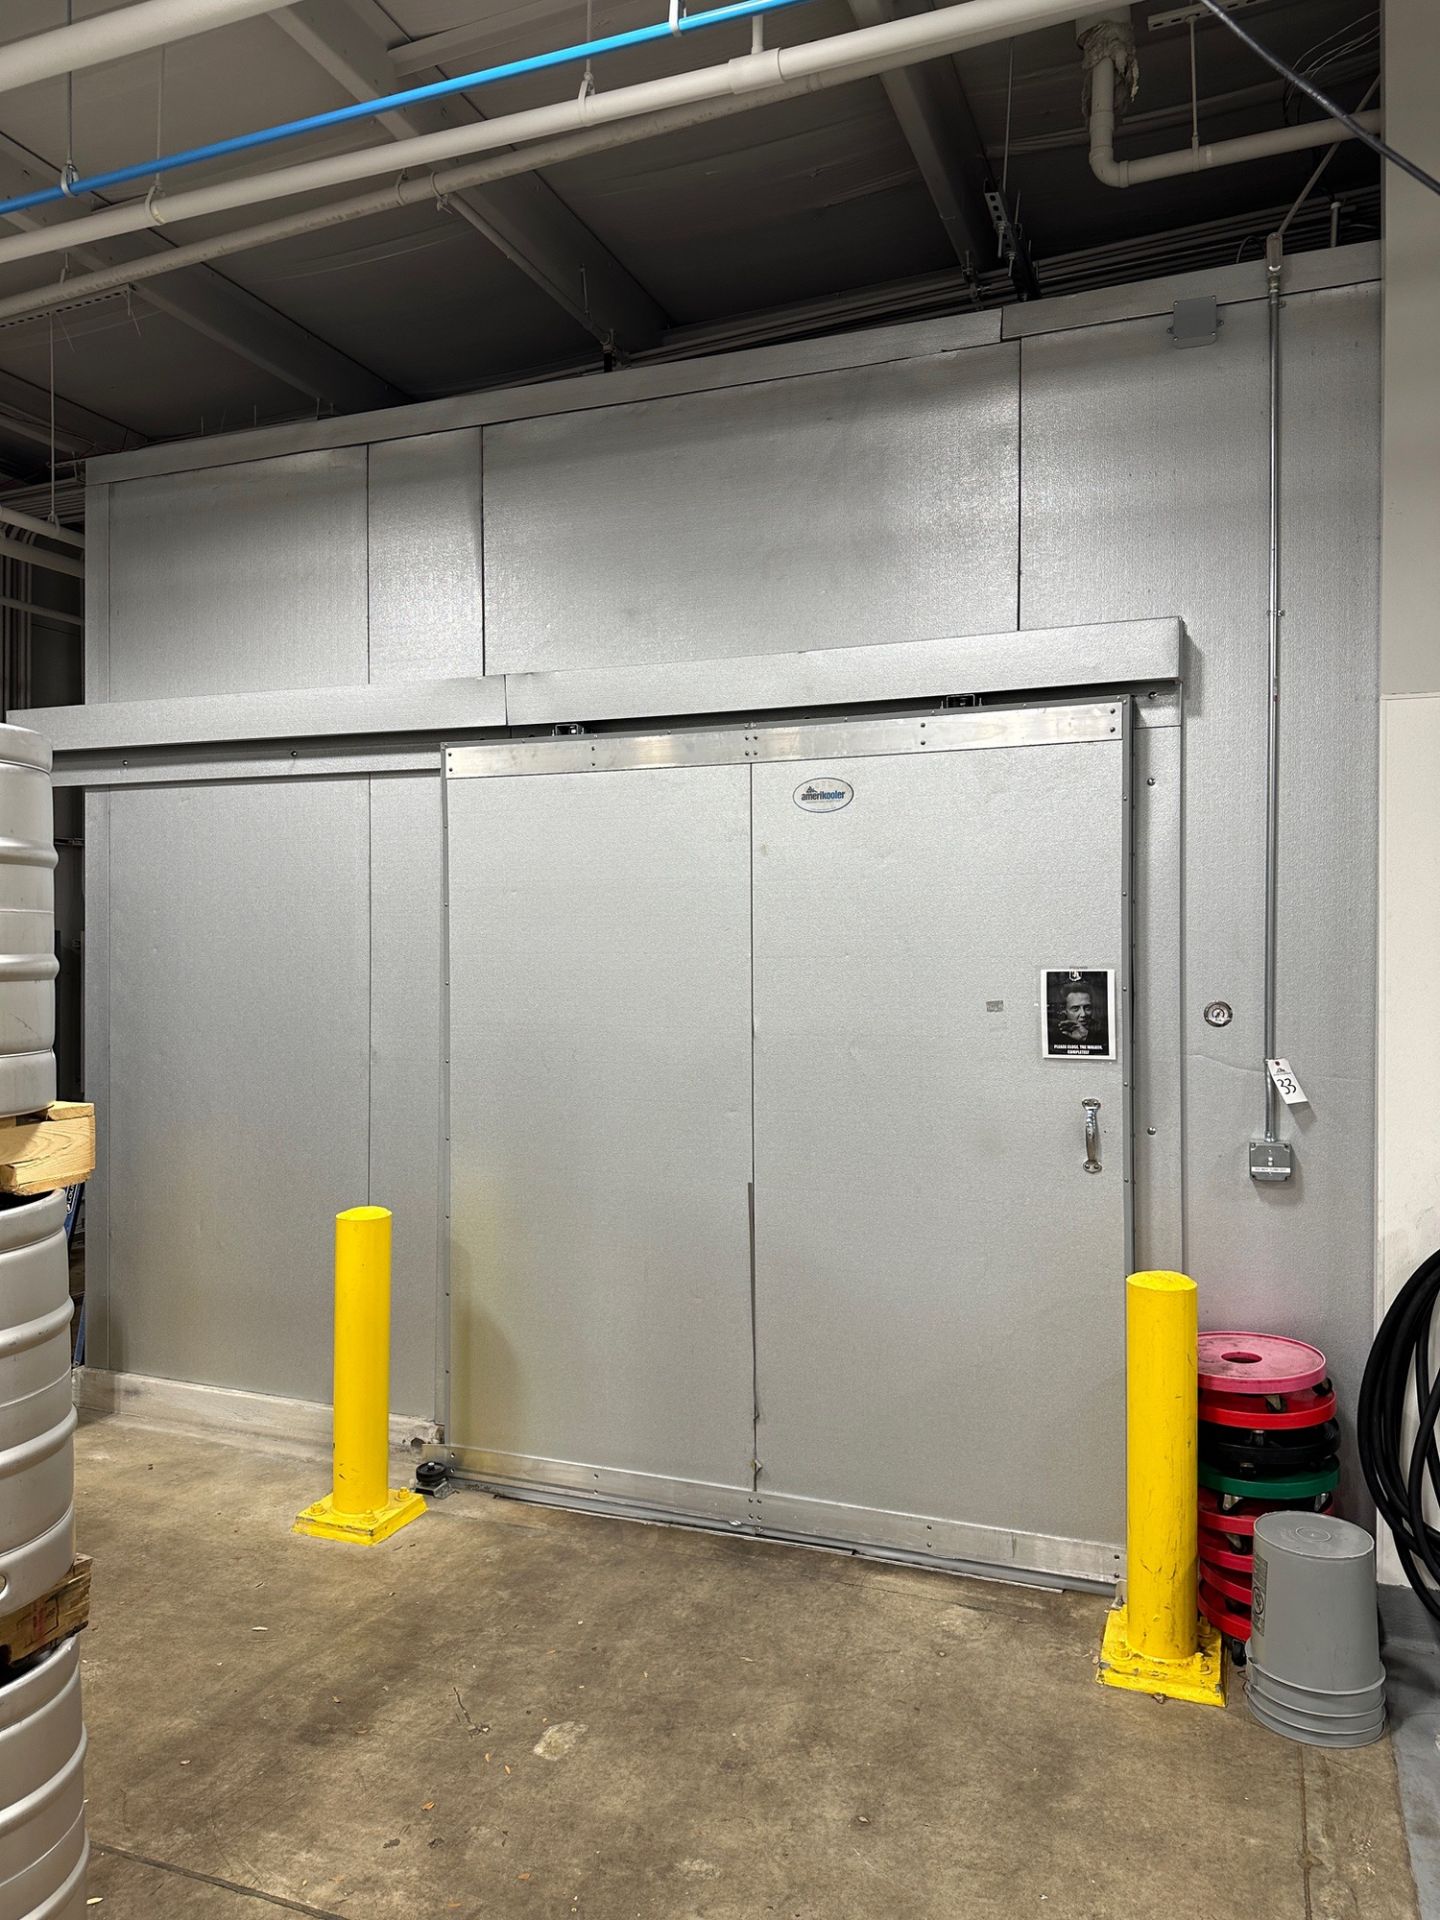 Amerikooler Walk-In Cooler with Sliding Door (Approx. 30' x 14' x 12' O.H. and 17' x 9' x 12' O.H.